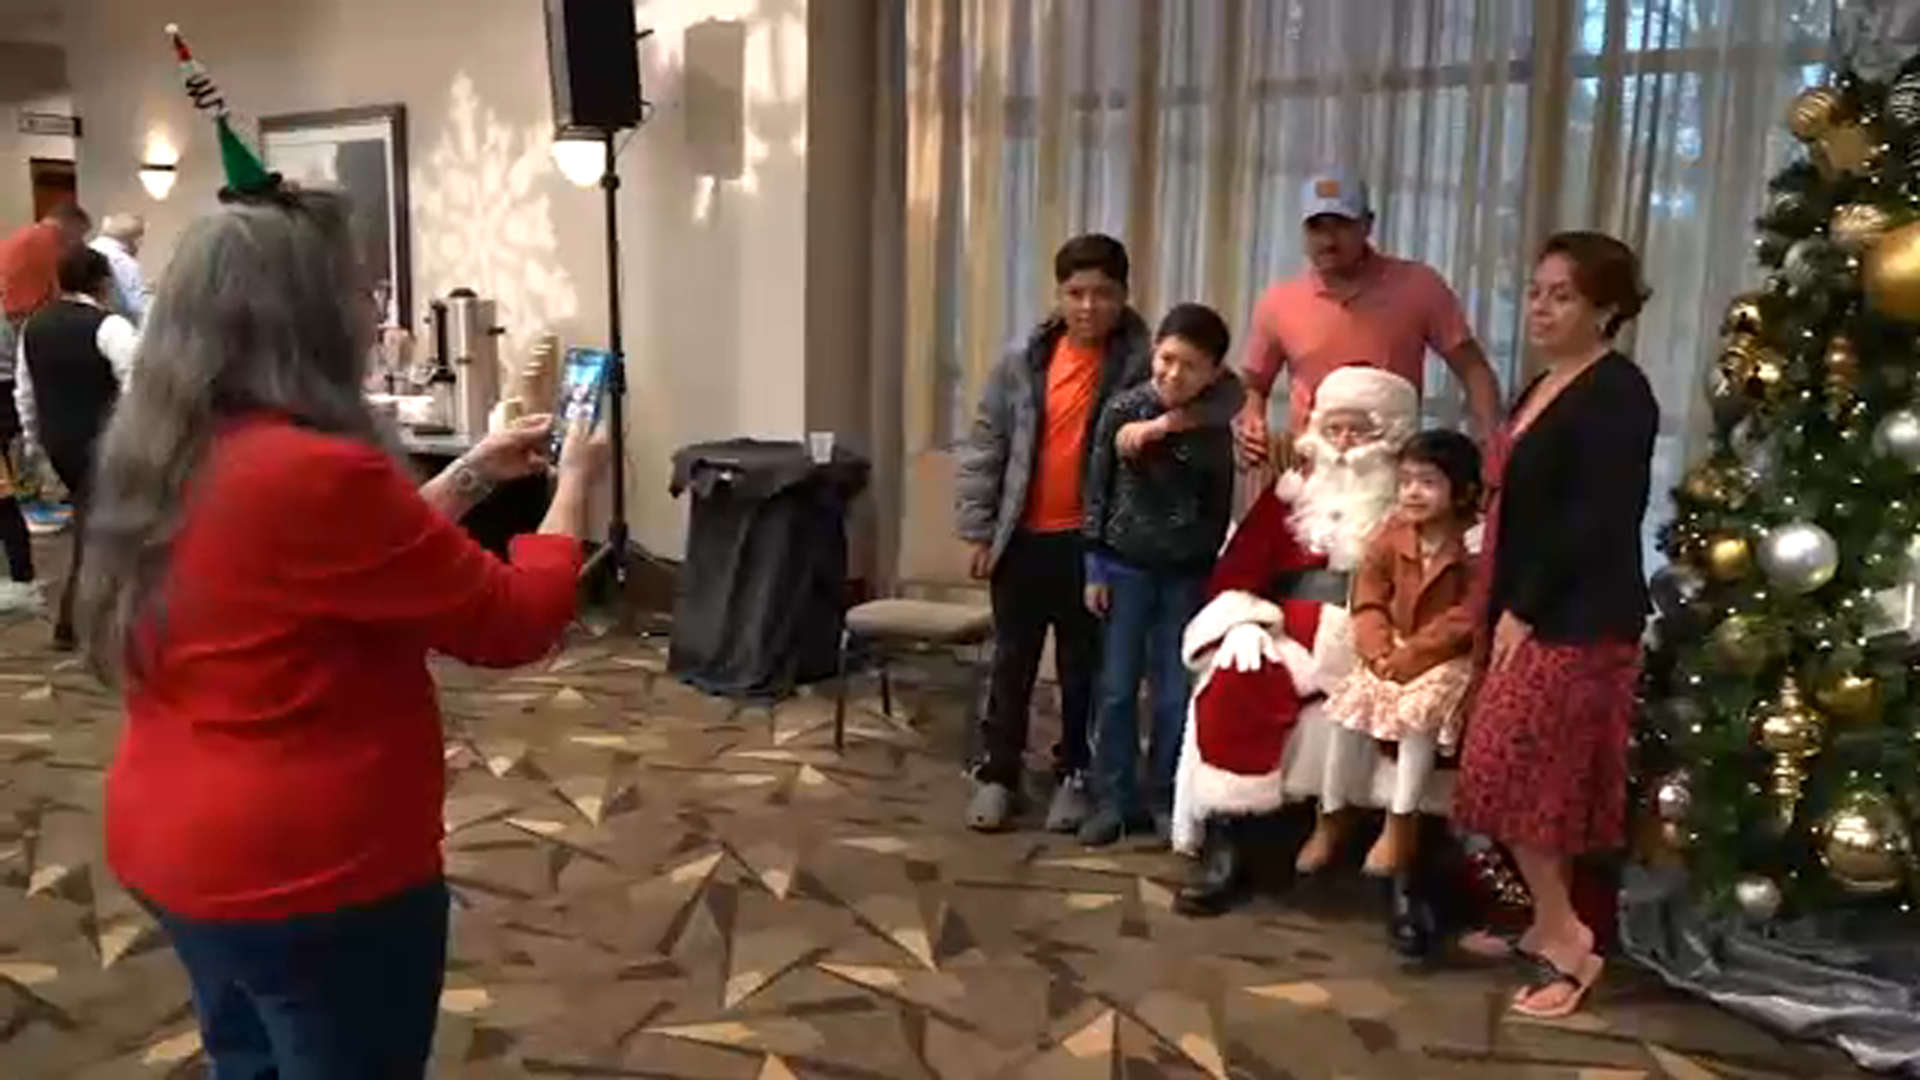 Holiday Spectacular event brings joy to families affected by childhood cancer